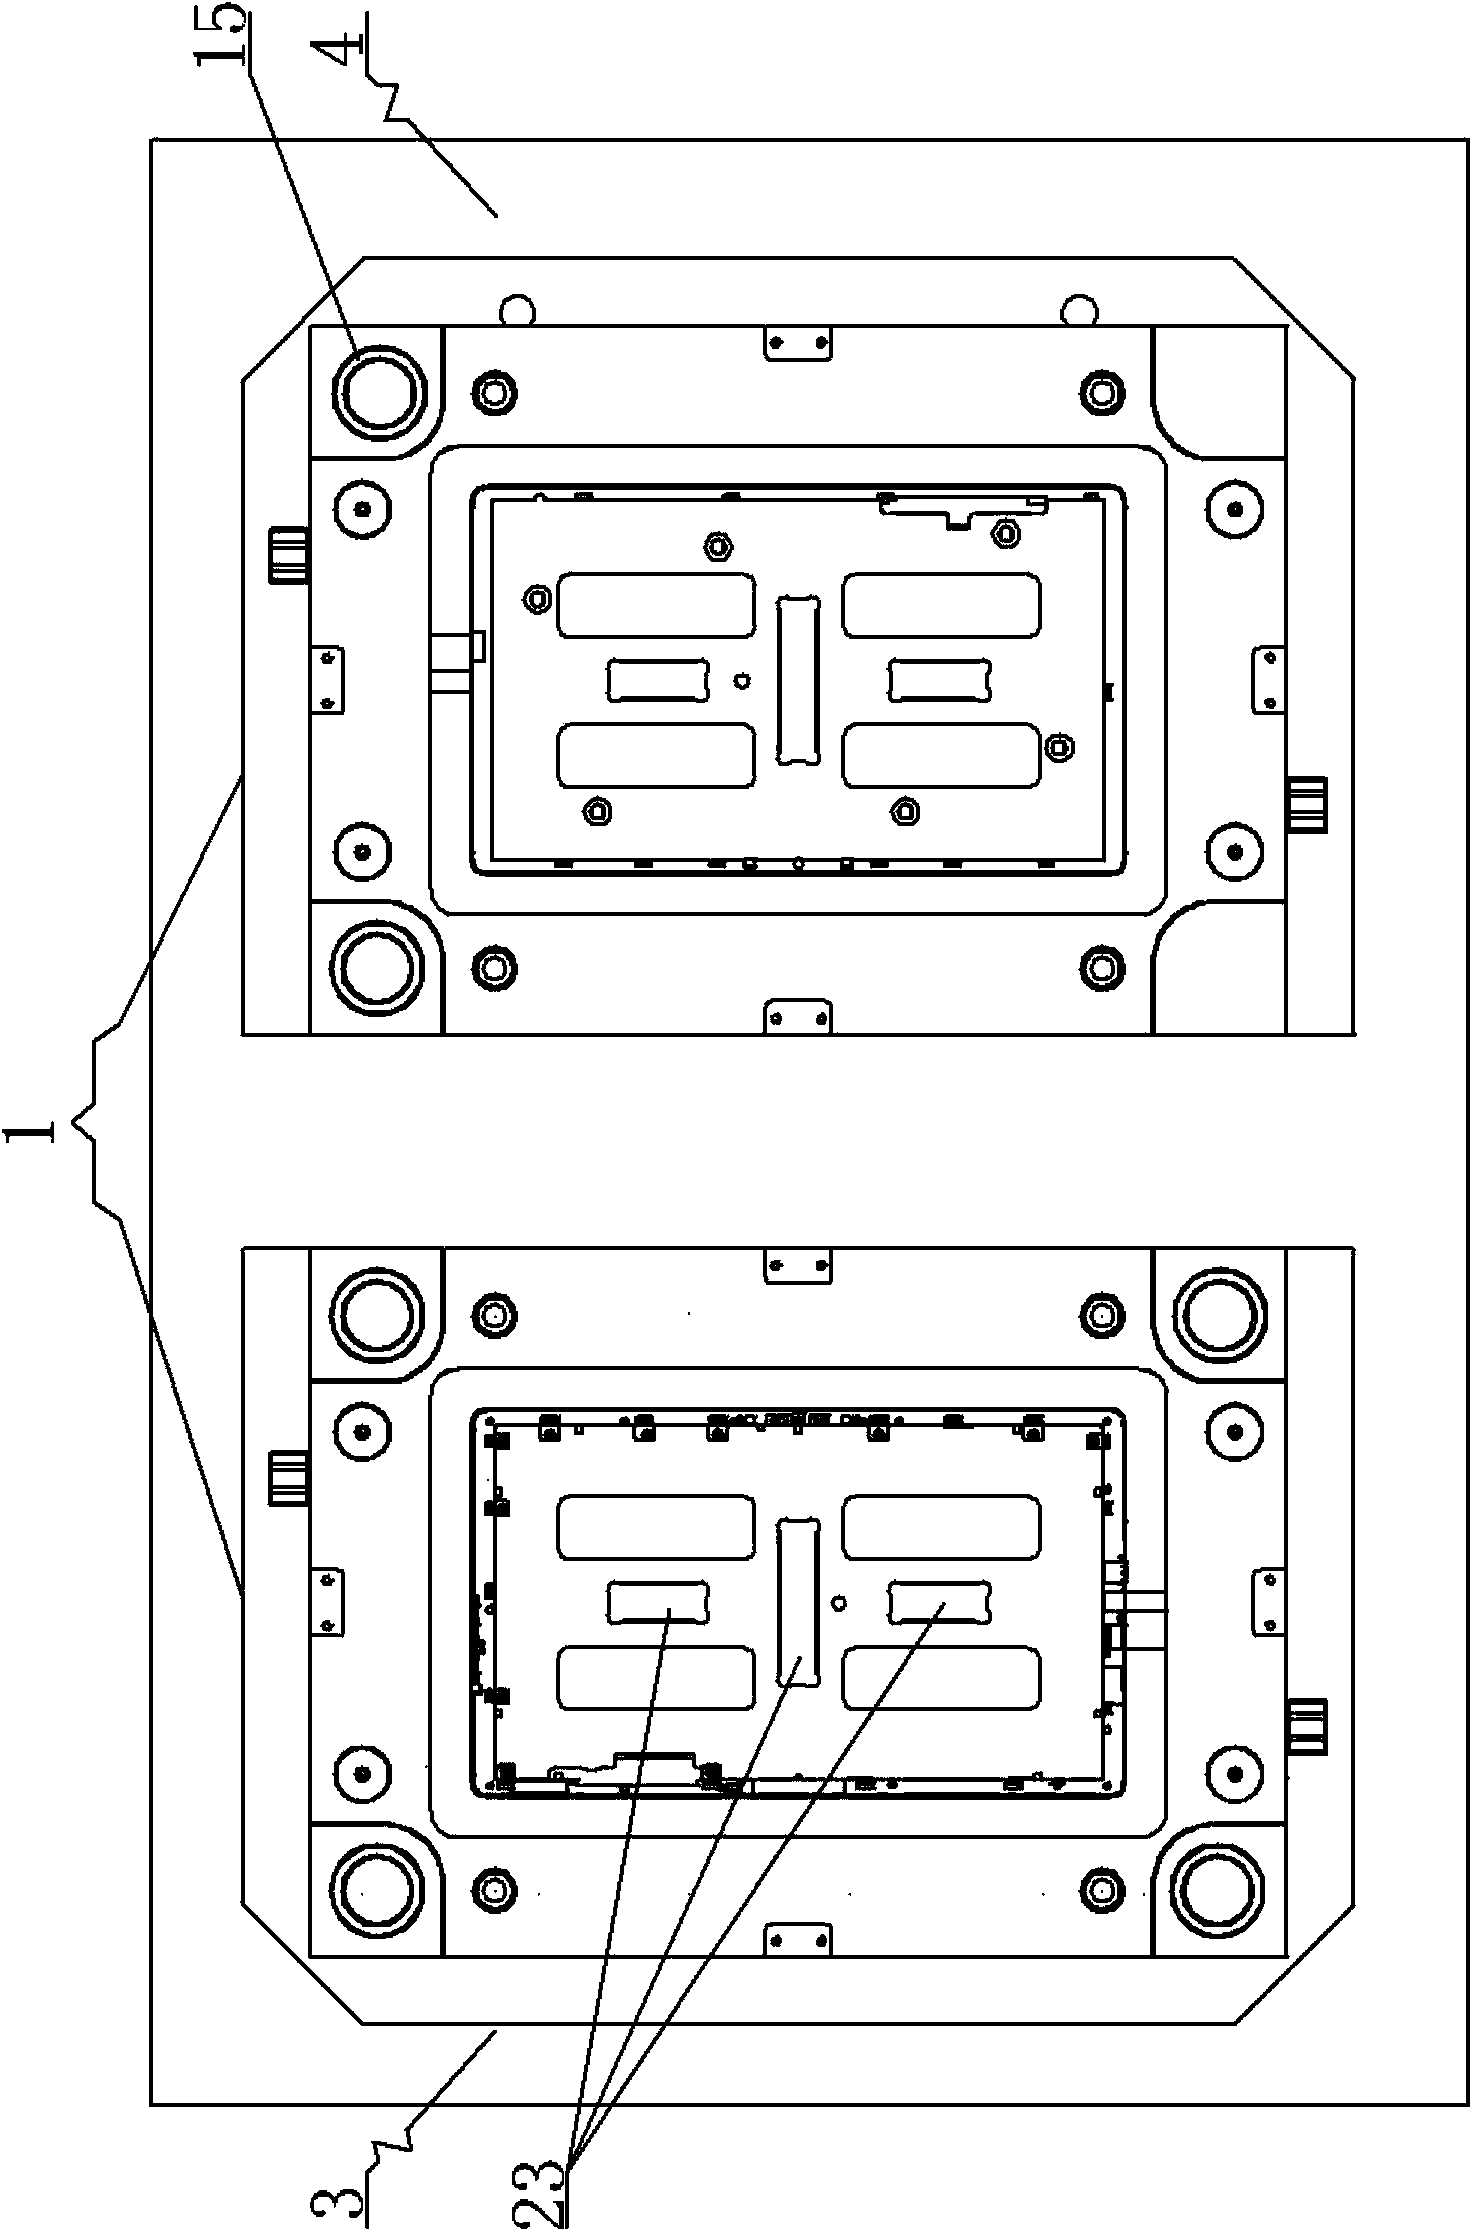 Double color injection mold for front frame of computer